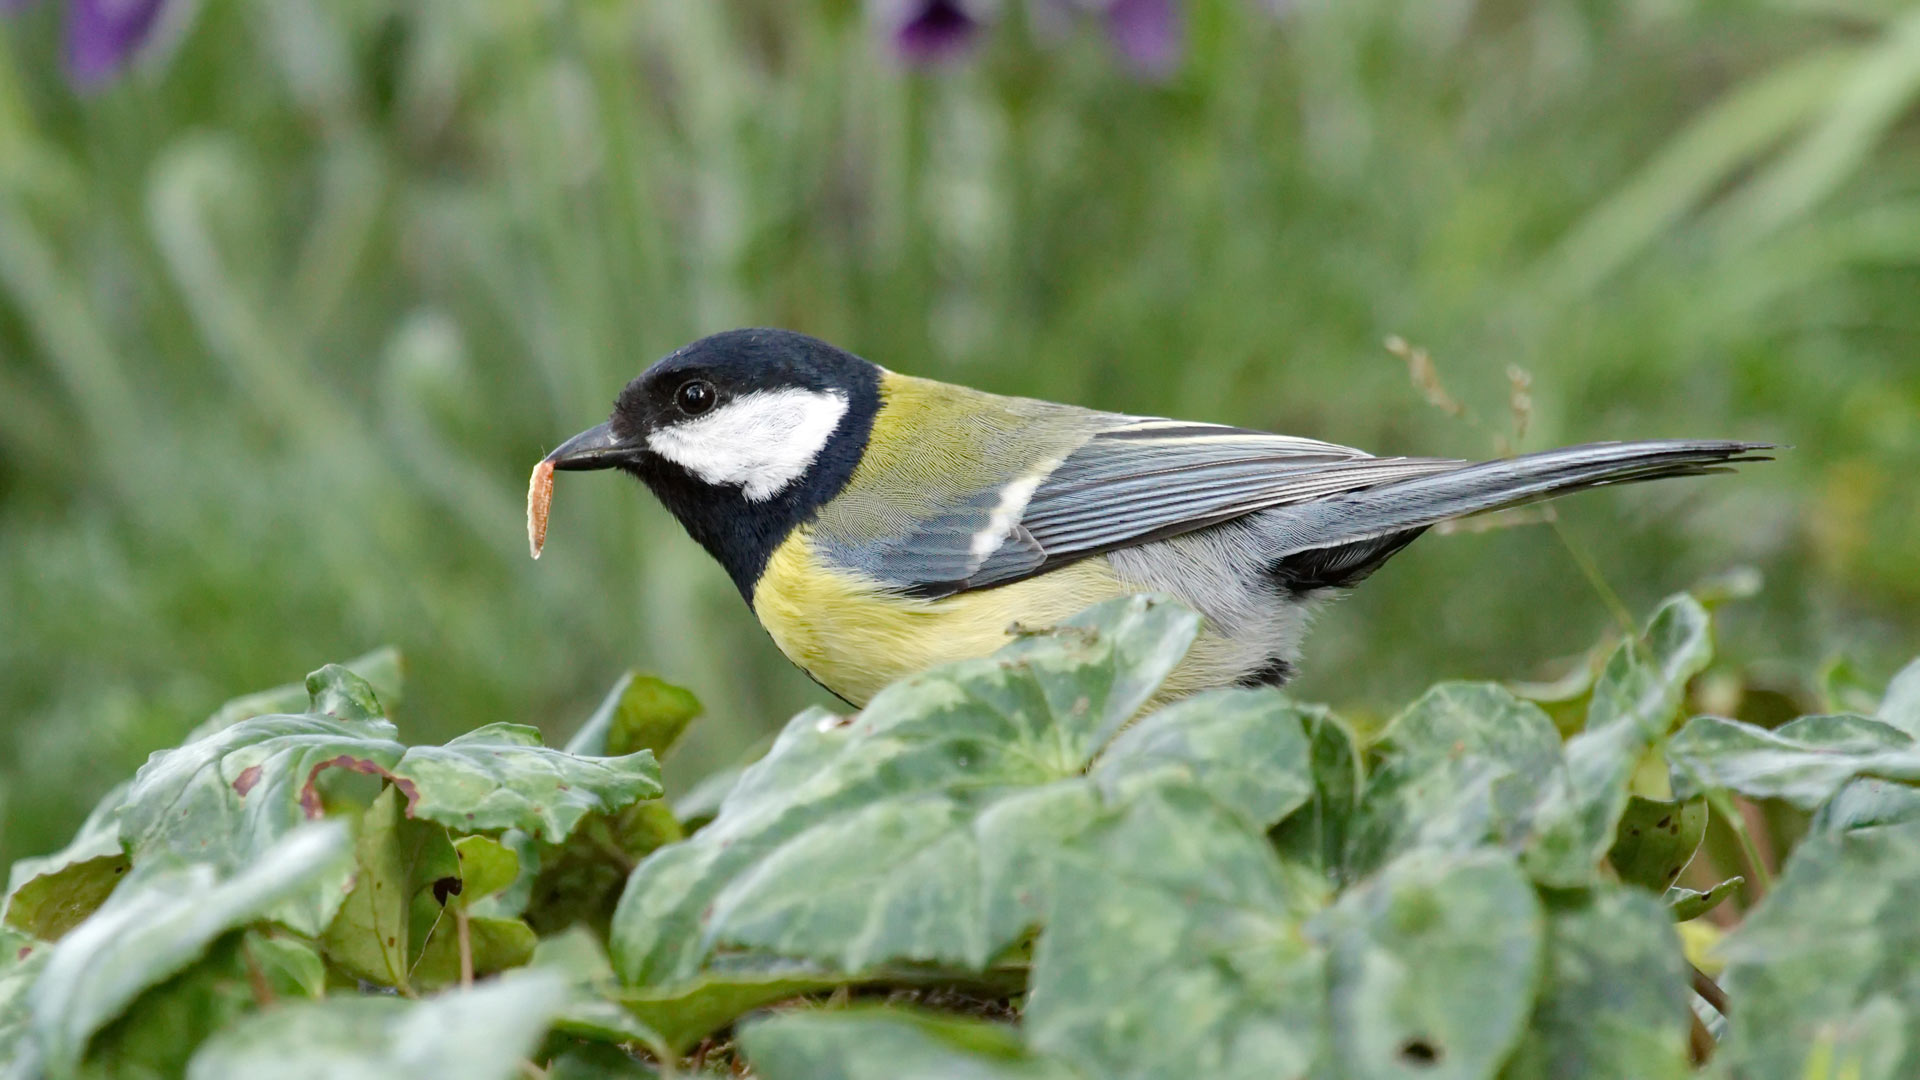 Coal tit (periparus ater) bird eating a worm behind green leaves